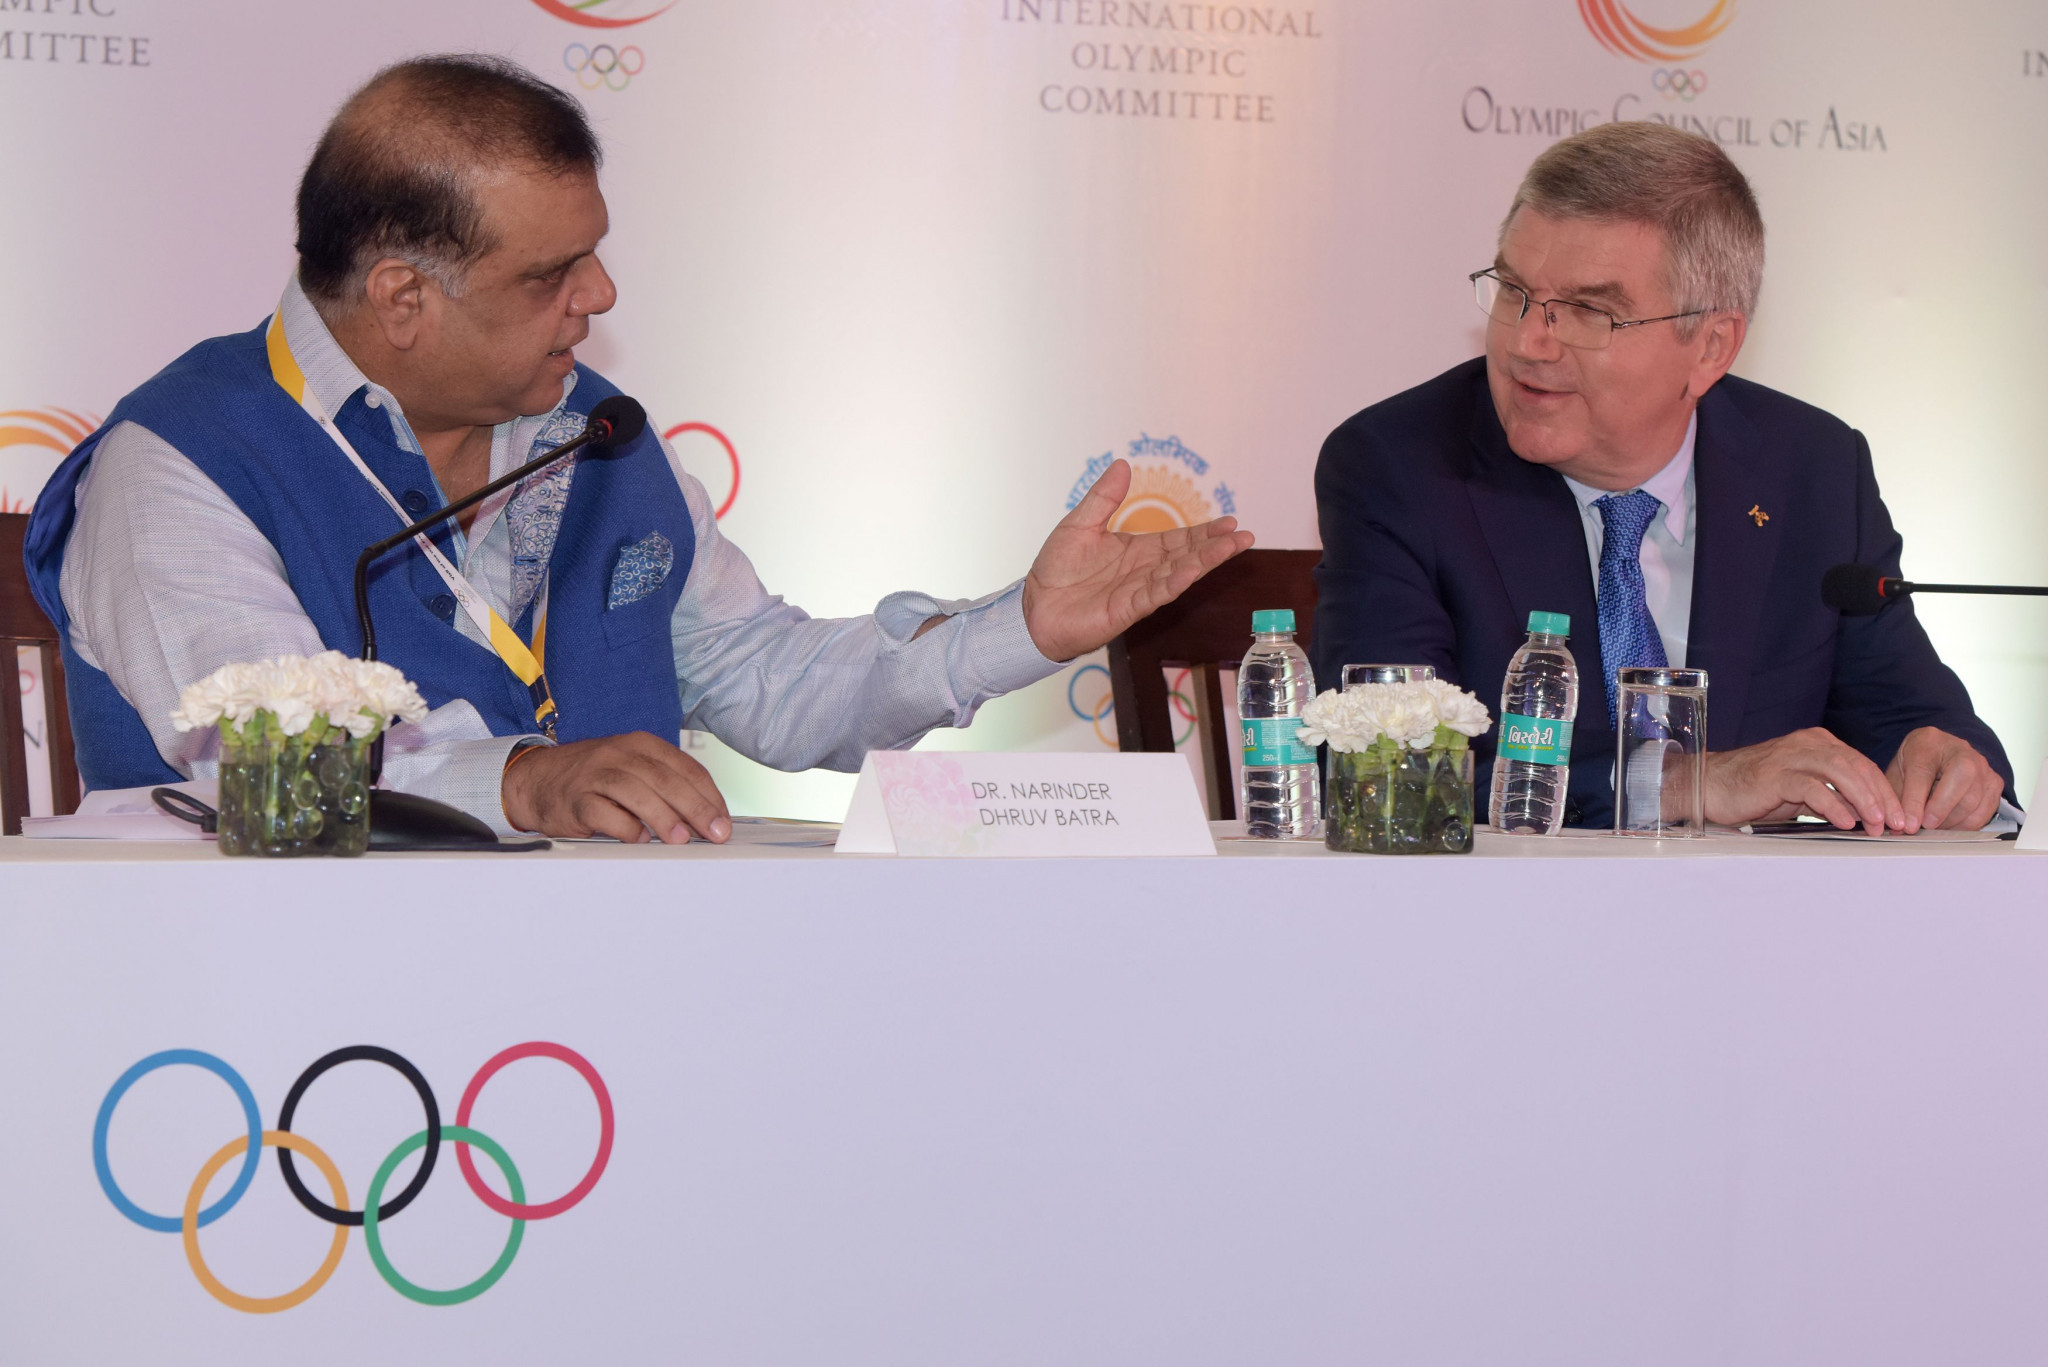 Narinder Batra has said India is still keen on hosting the 2032 Olympics ©Getty Images